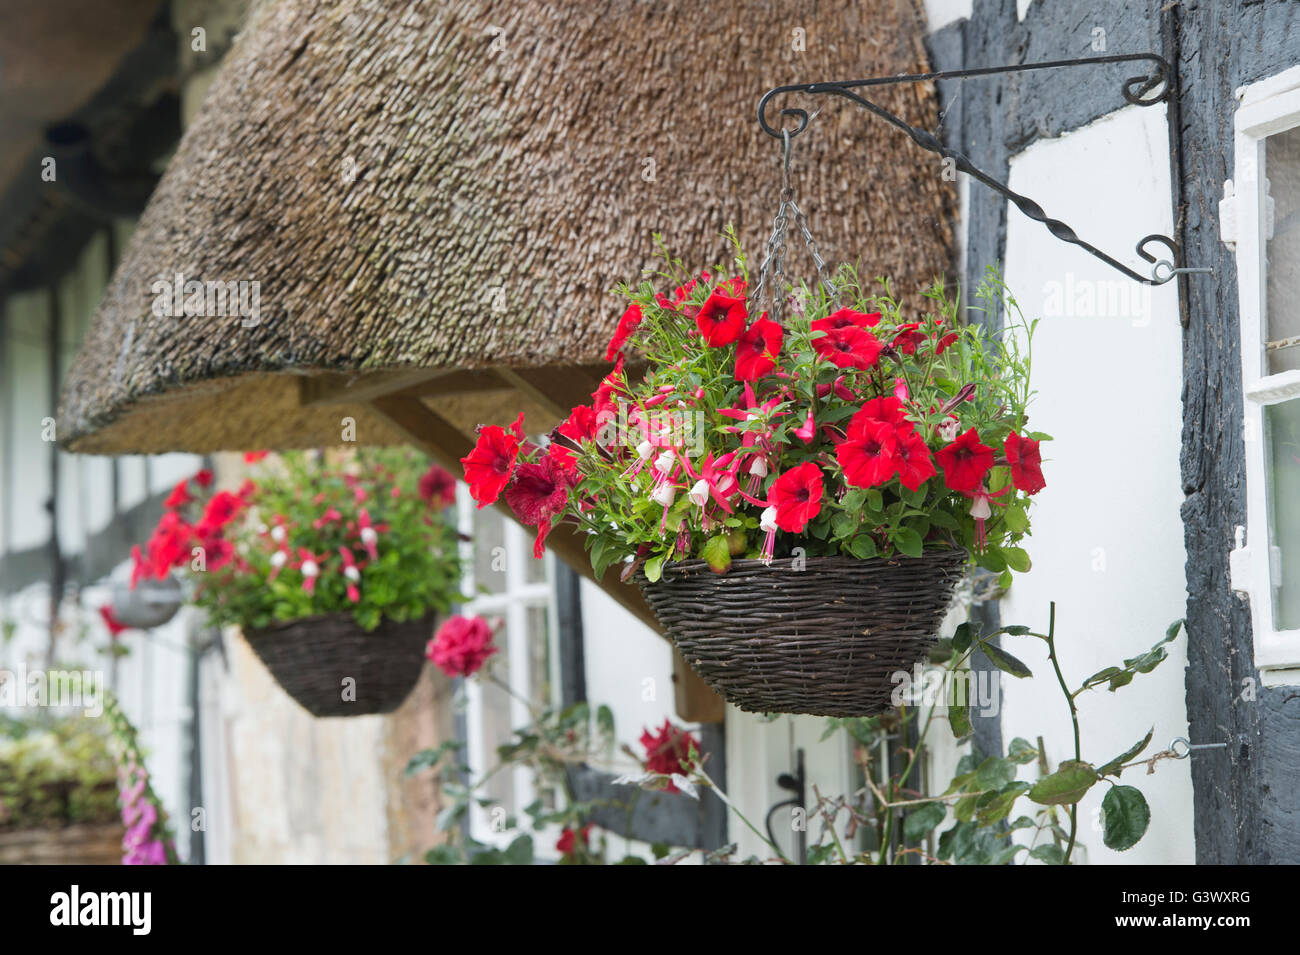 Hanging baskets in front of a black and white timber framed cottage. Ashton Under Hill, Wychavon district, Worcestershire, UK Stock Photo